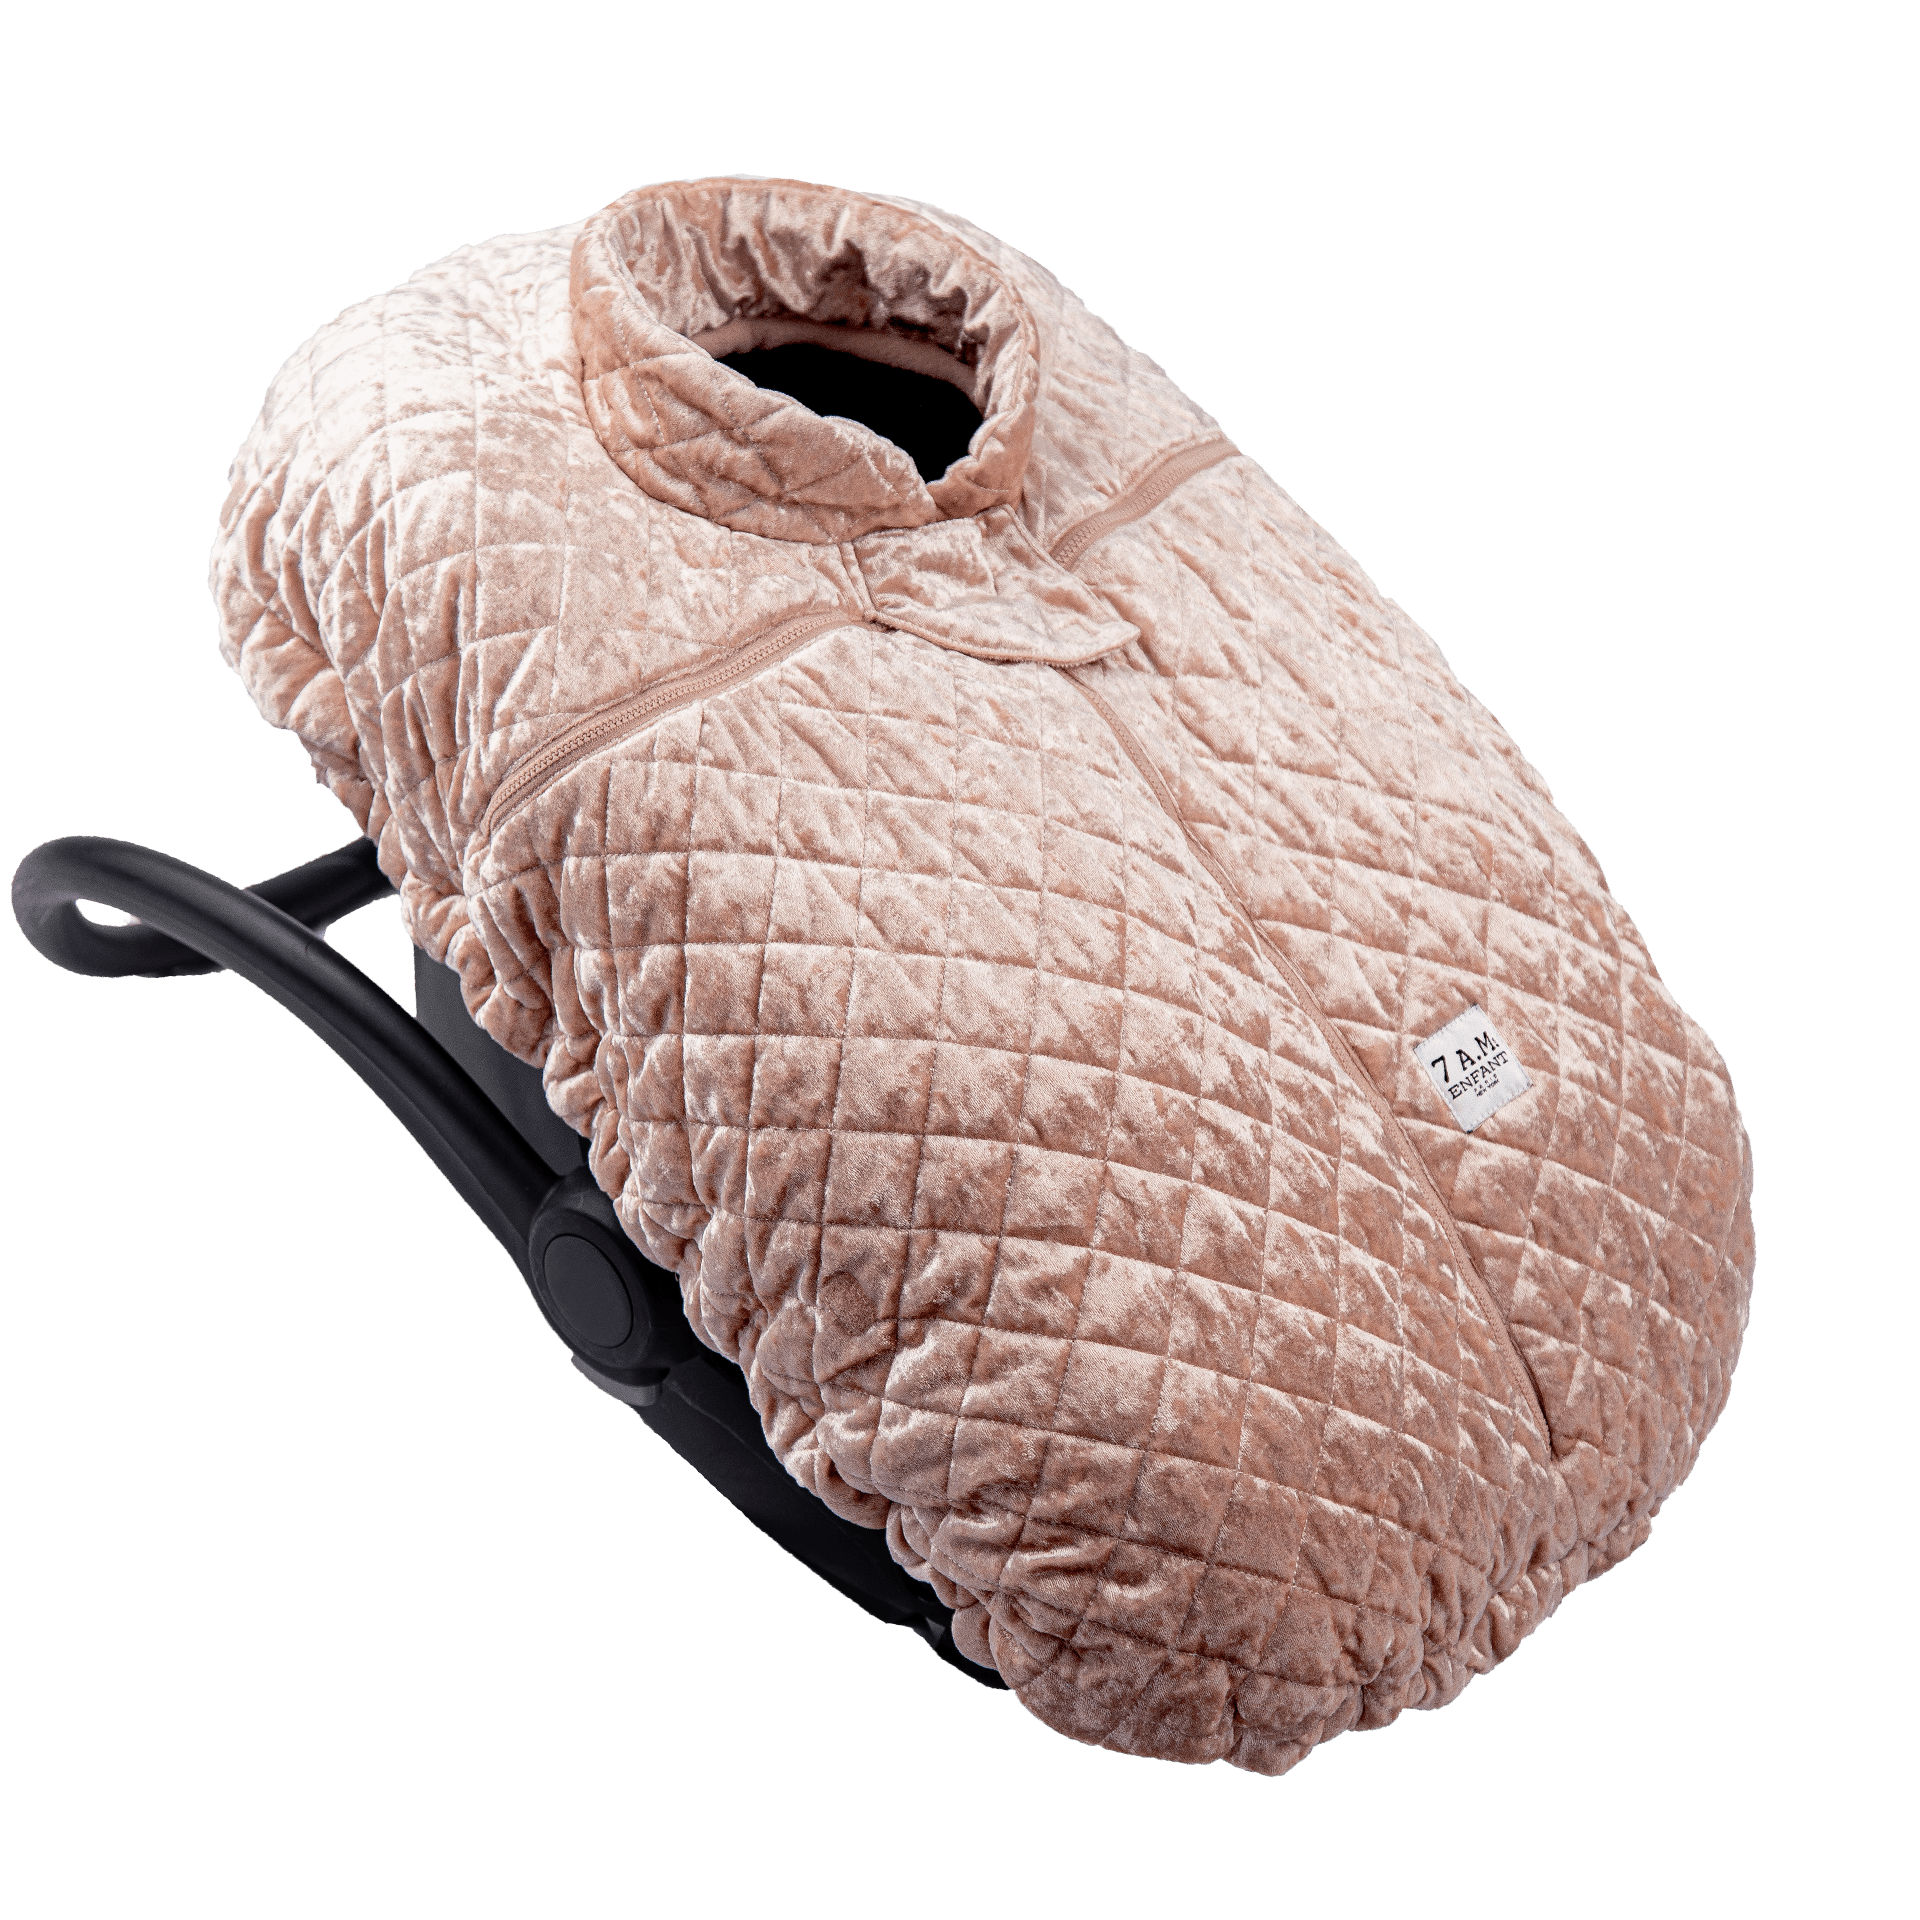 7 AM Enfant Car Seat Cocoon Baby Cover, Quilted Velvet 0-12M - ANB Baby -7 AM car seat accessory